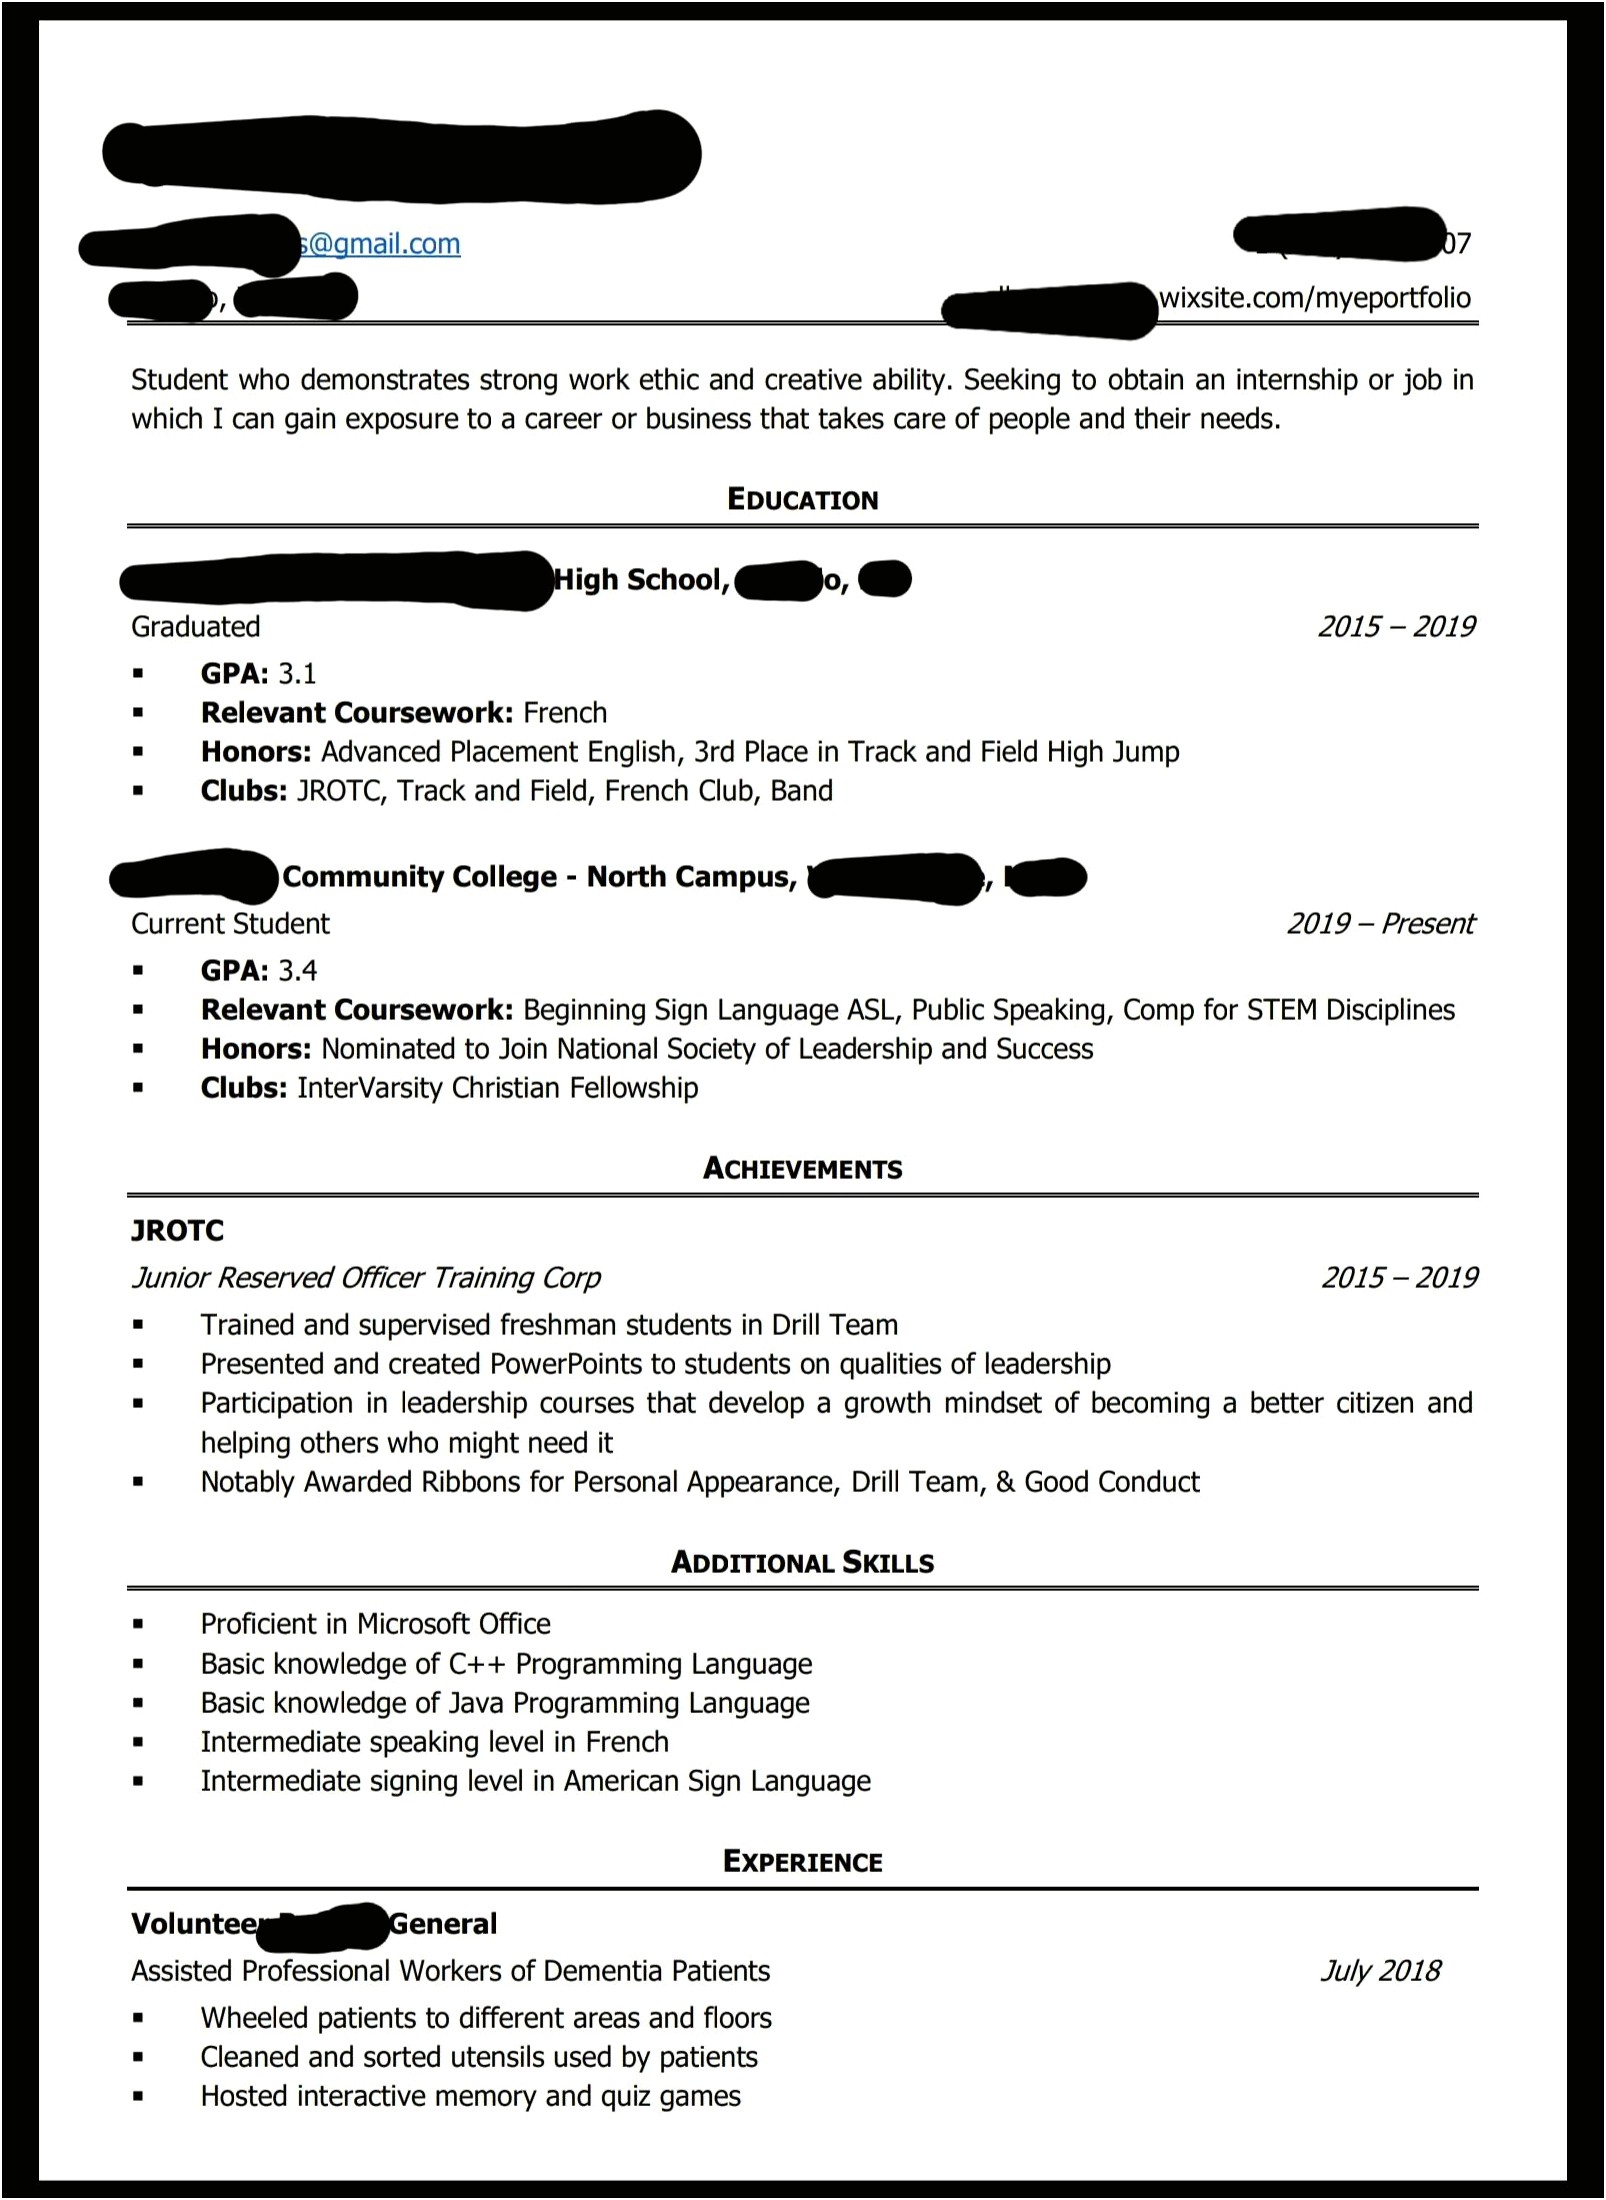 Achievements On A Resume For High School